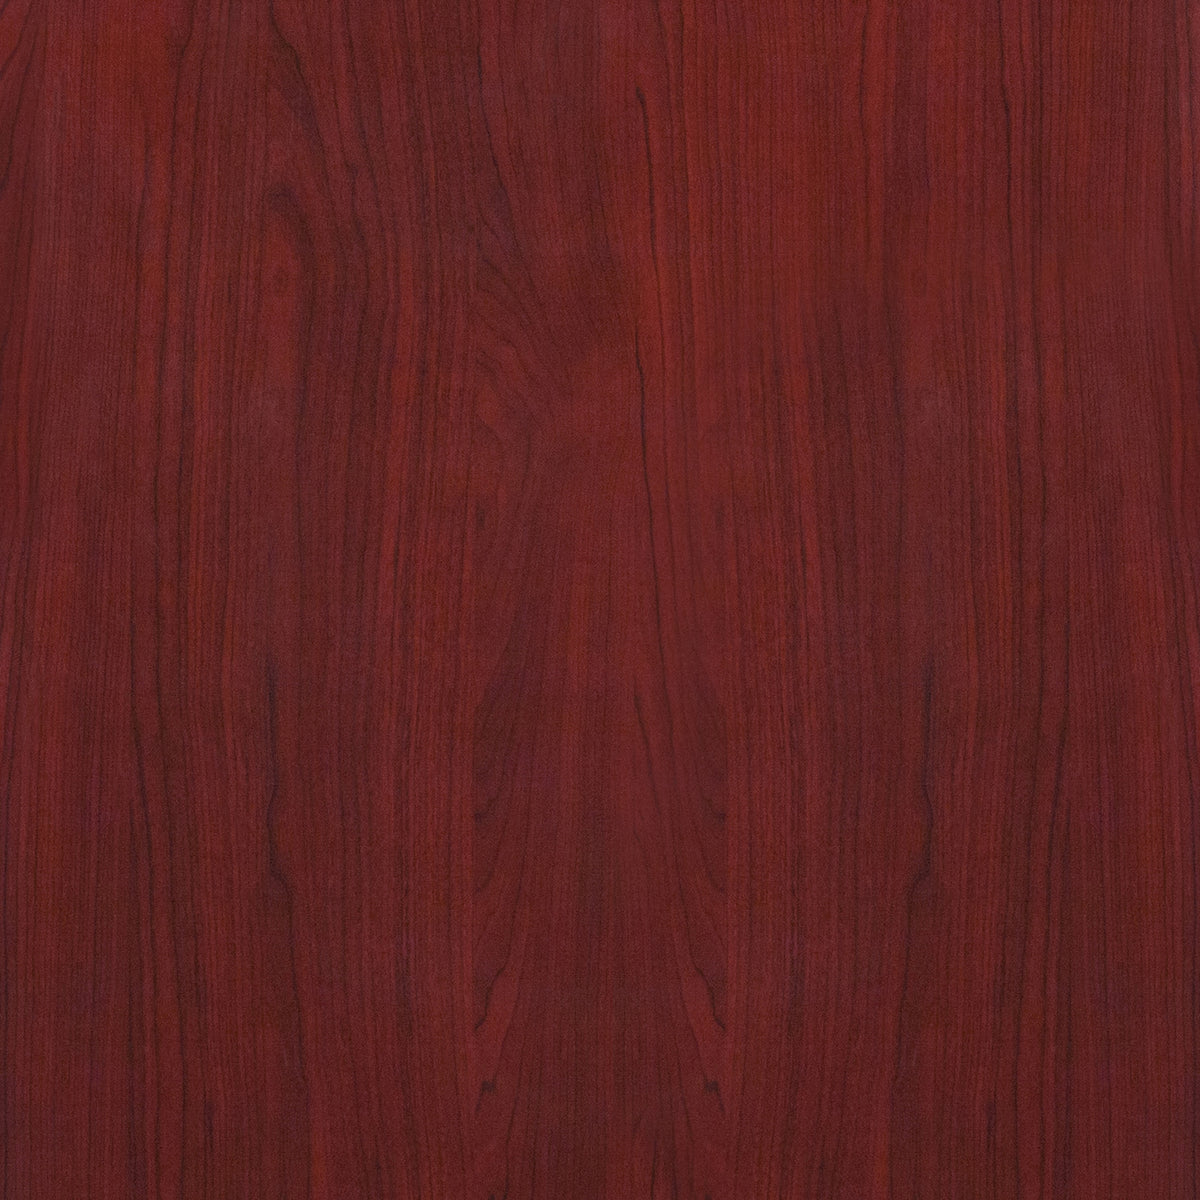 Mahogany |#| 30inch x 42inch Rectangular High-Gloss Mahogany Resin Table Top with 2inch Thick Edge